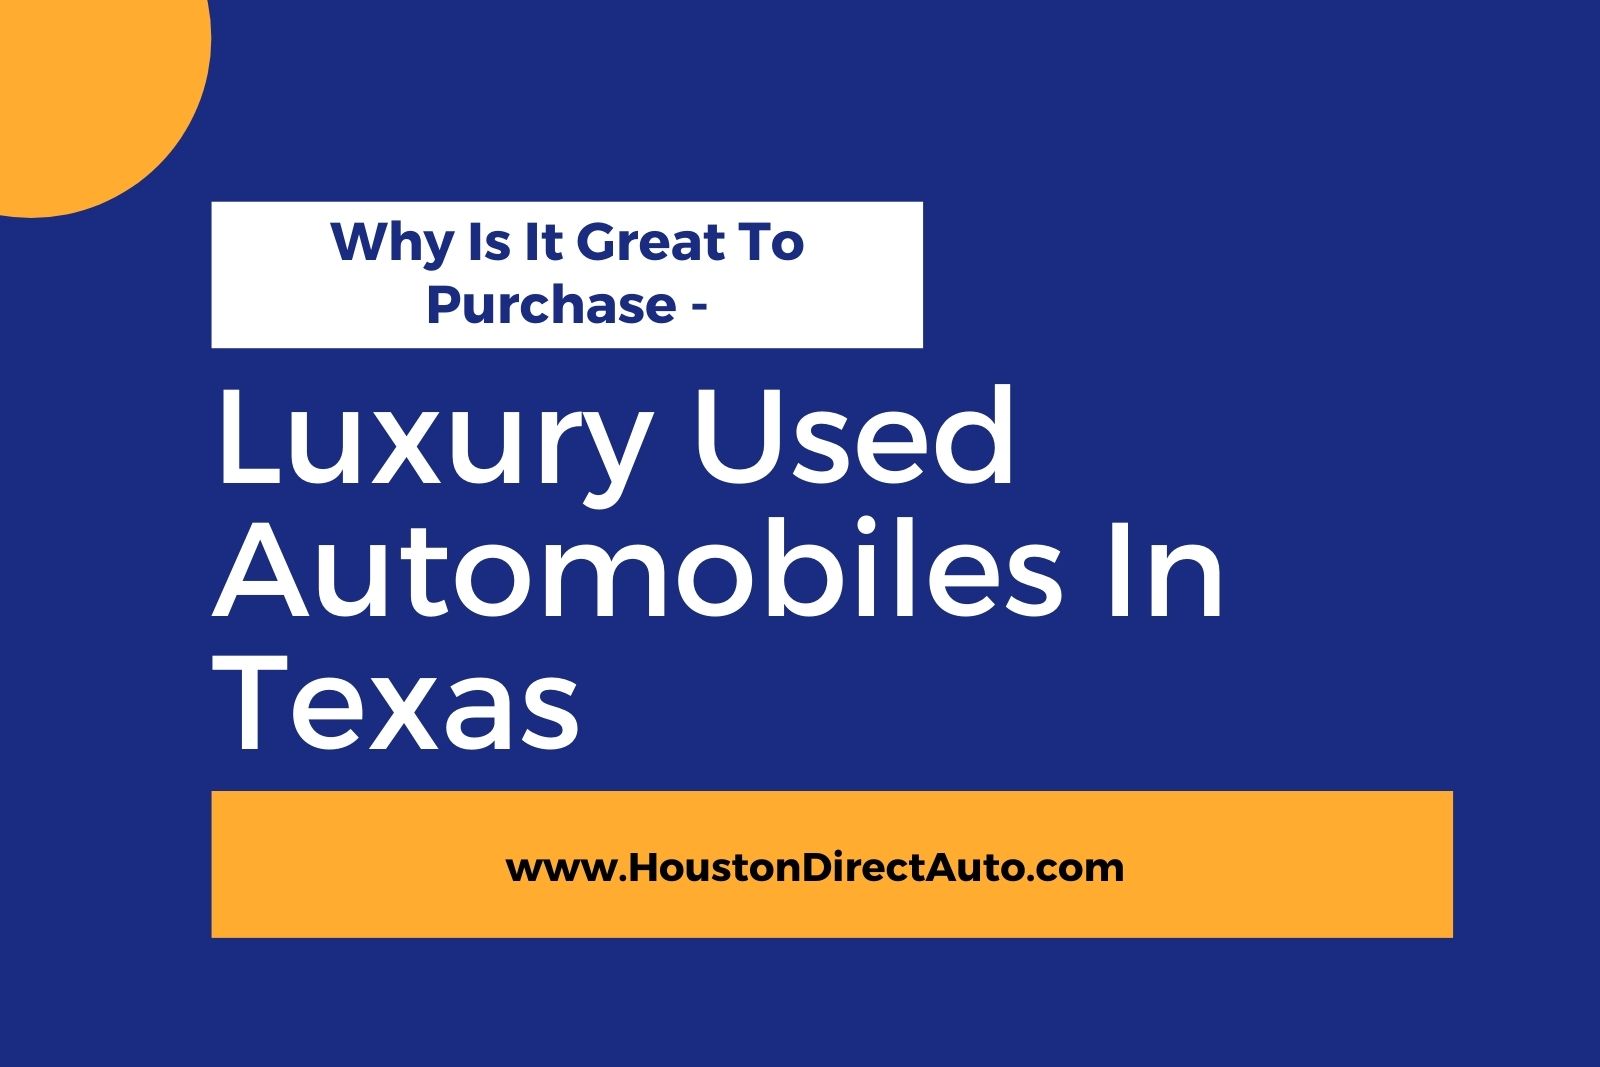 Why Is It Great To Purchase Luxury Used Automobiles From Used Car Dealerships In Texas?